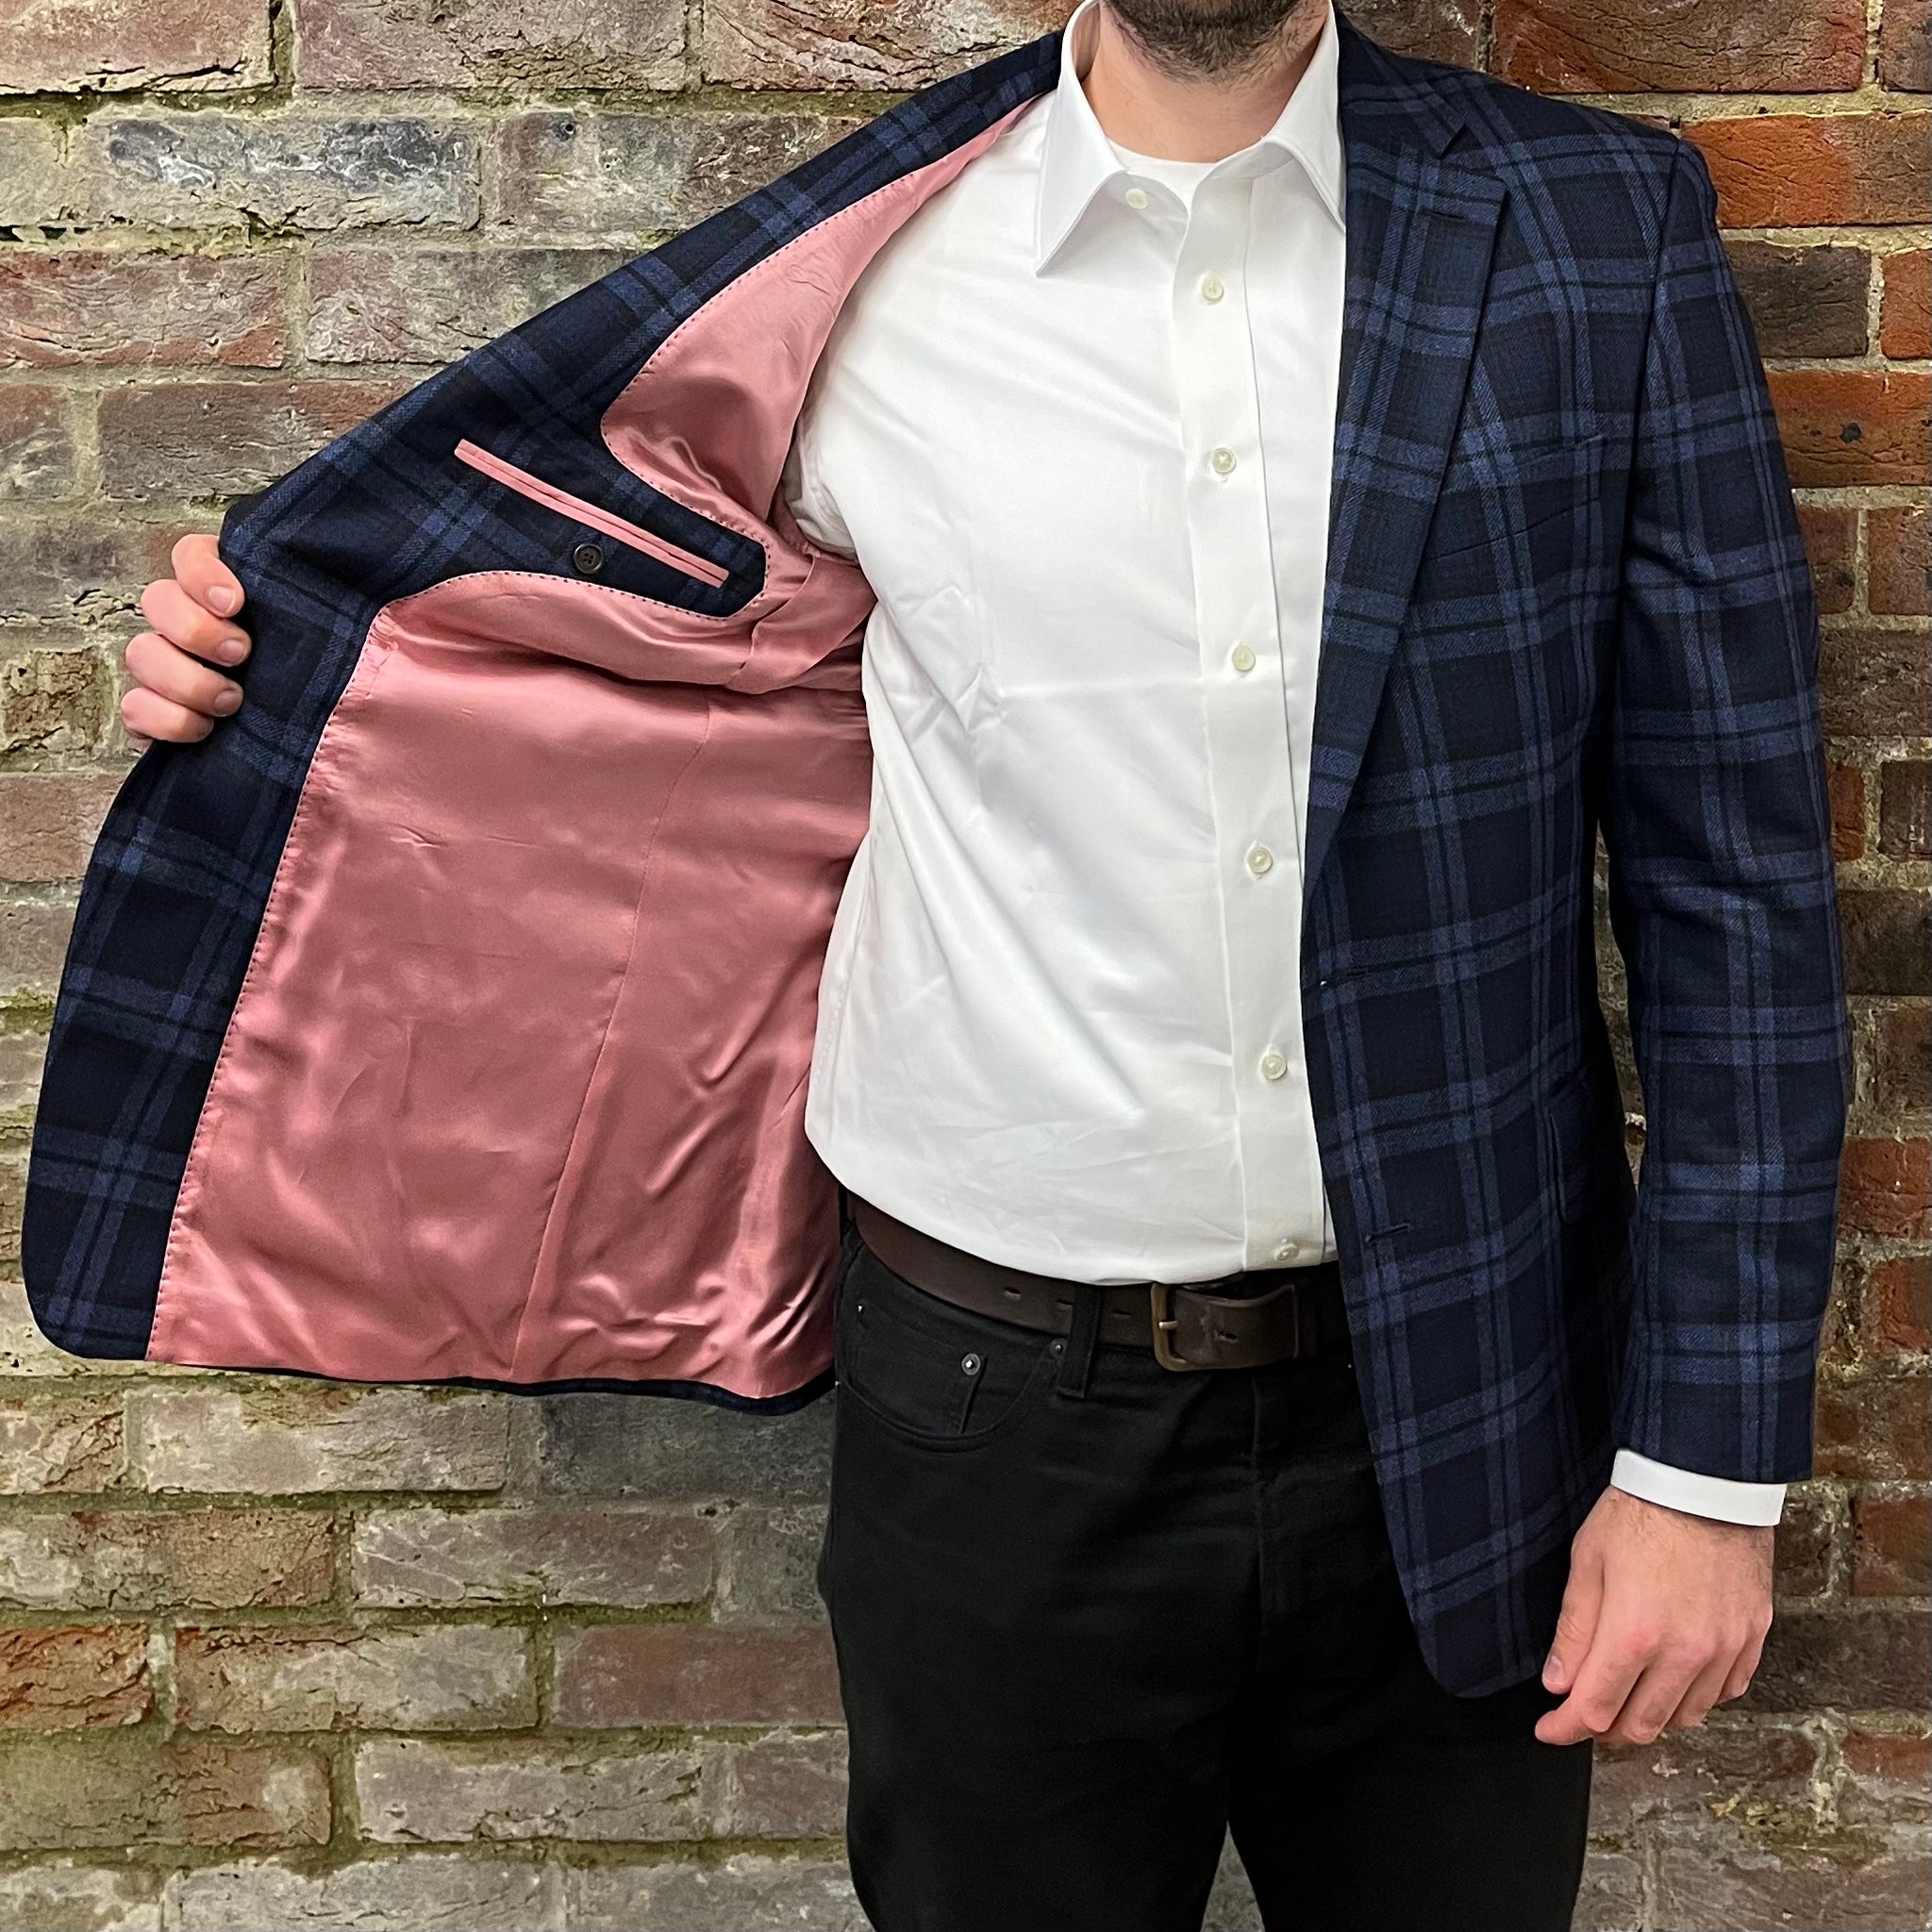 Regent 'The Toad' Jacket - Navy with Light Blue and Black Overcheck - pink lining